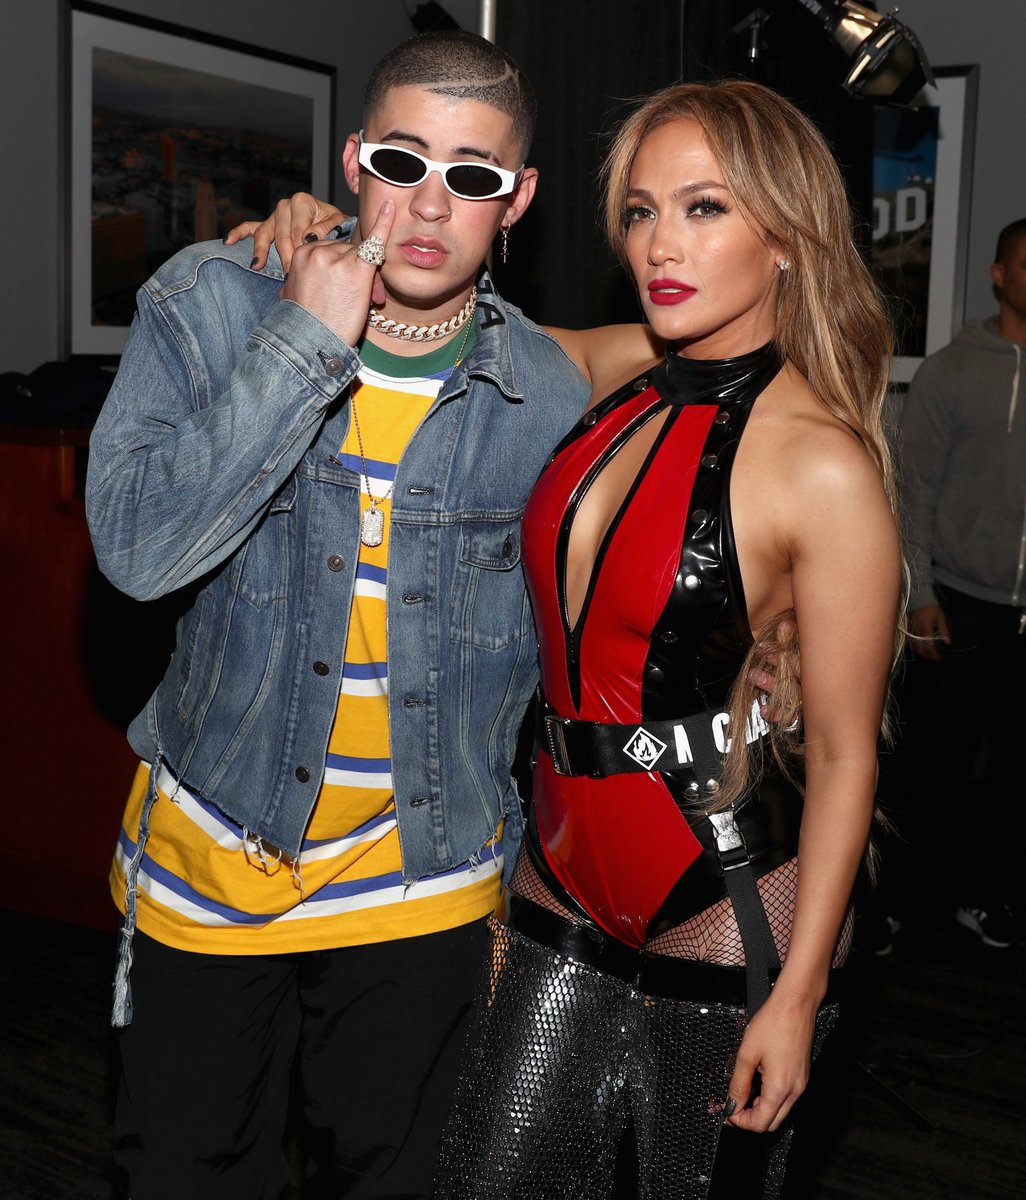 Bad Bunny: “JLo besides being a superstar, is a queen, a diva, with the picket and the most bastard presence that a woman can have and yet she is so afire, humble and genuine”